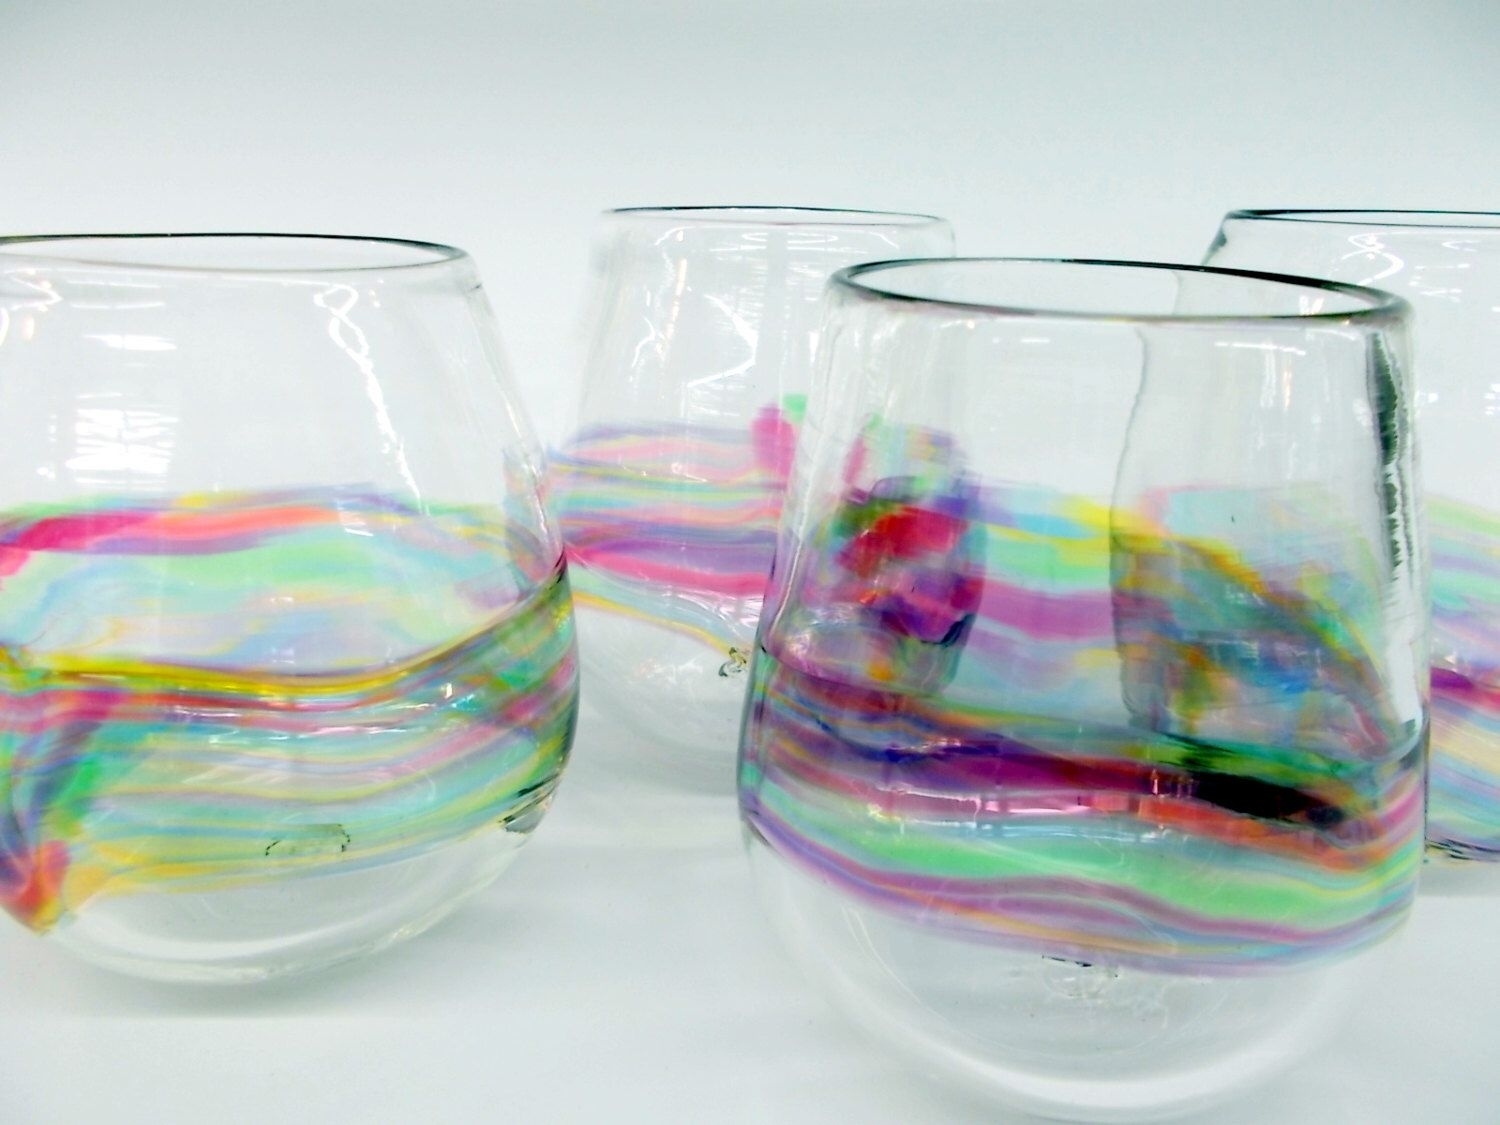 Wine Glasses Drinkware, Holiday Multicolored Metallic Angled Accent  Drinking Glass Cups, Set of 4